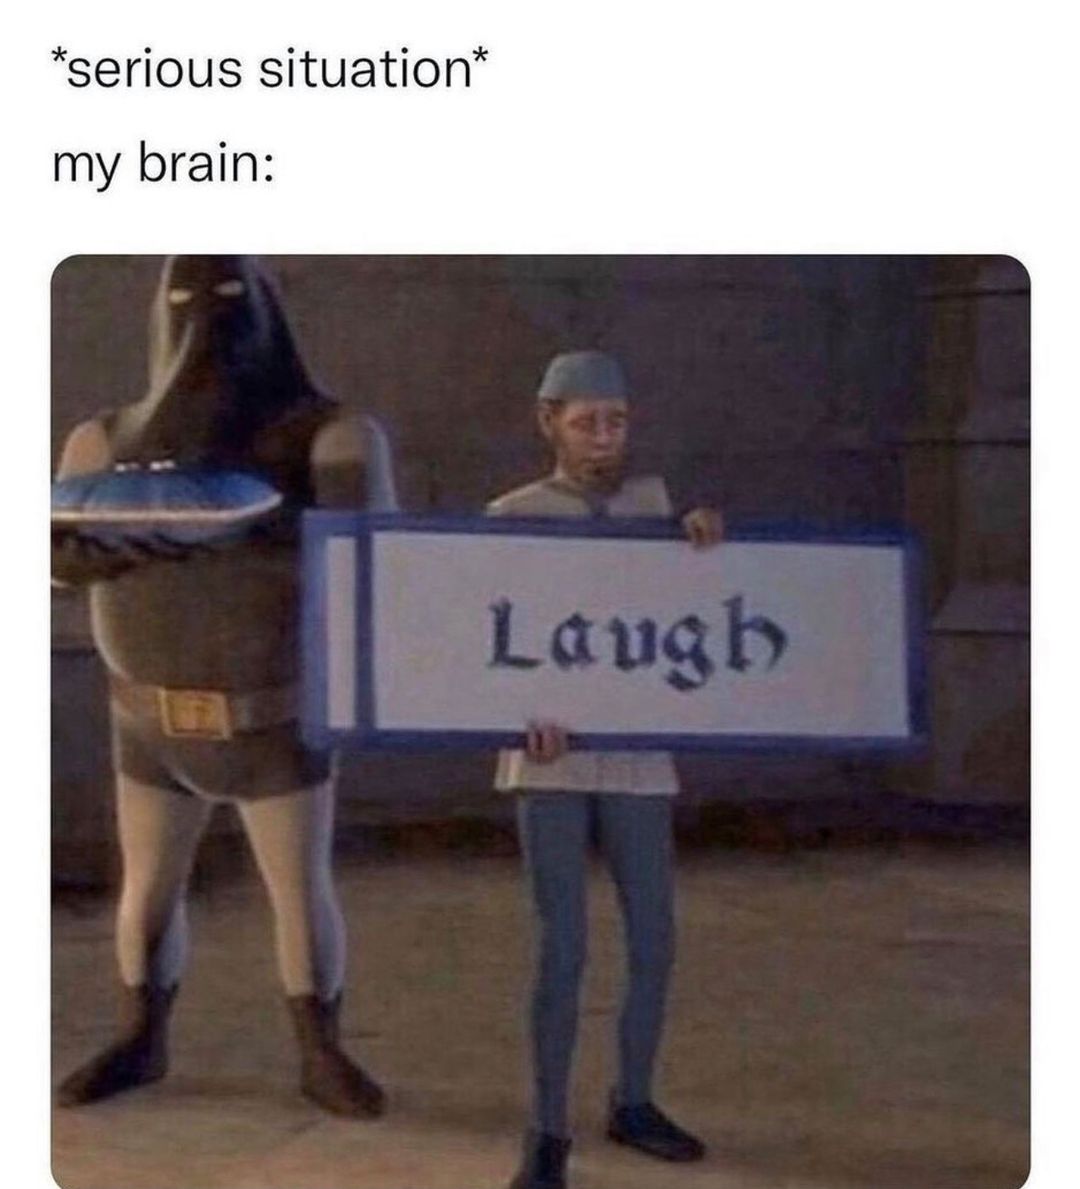 *Serious situation* My brain: Laugh.